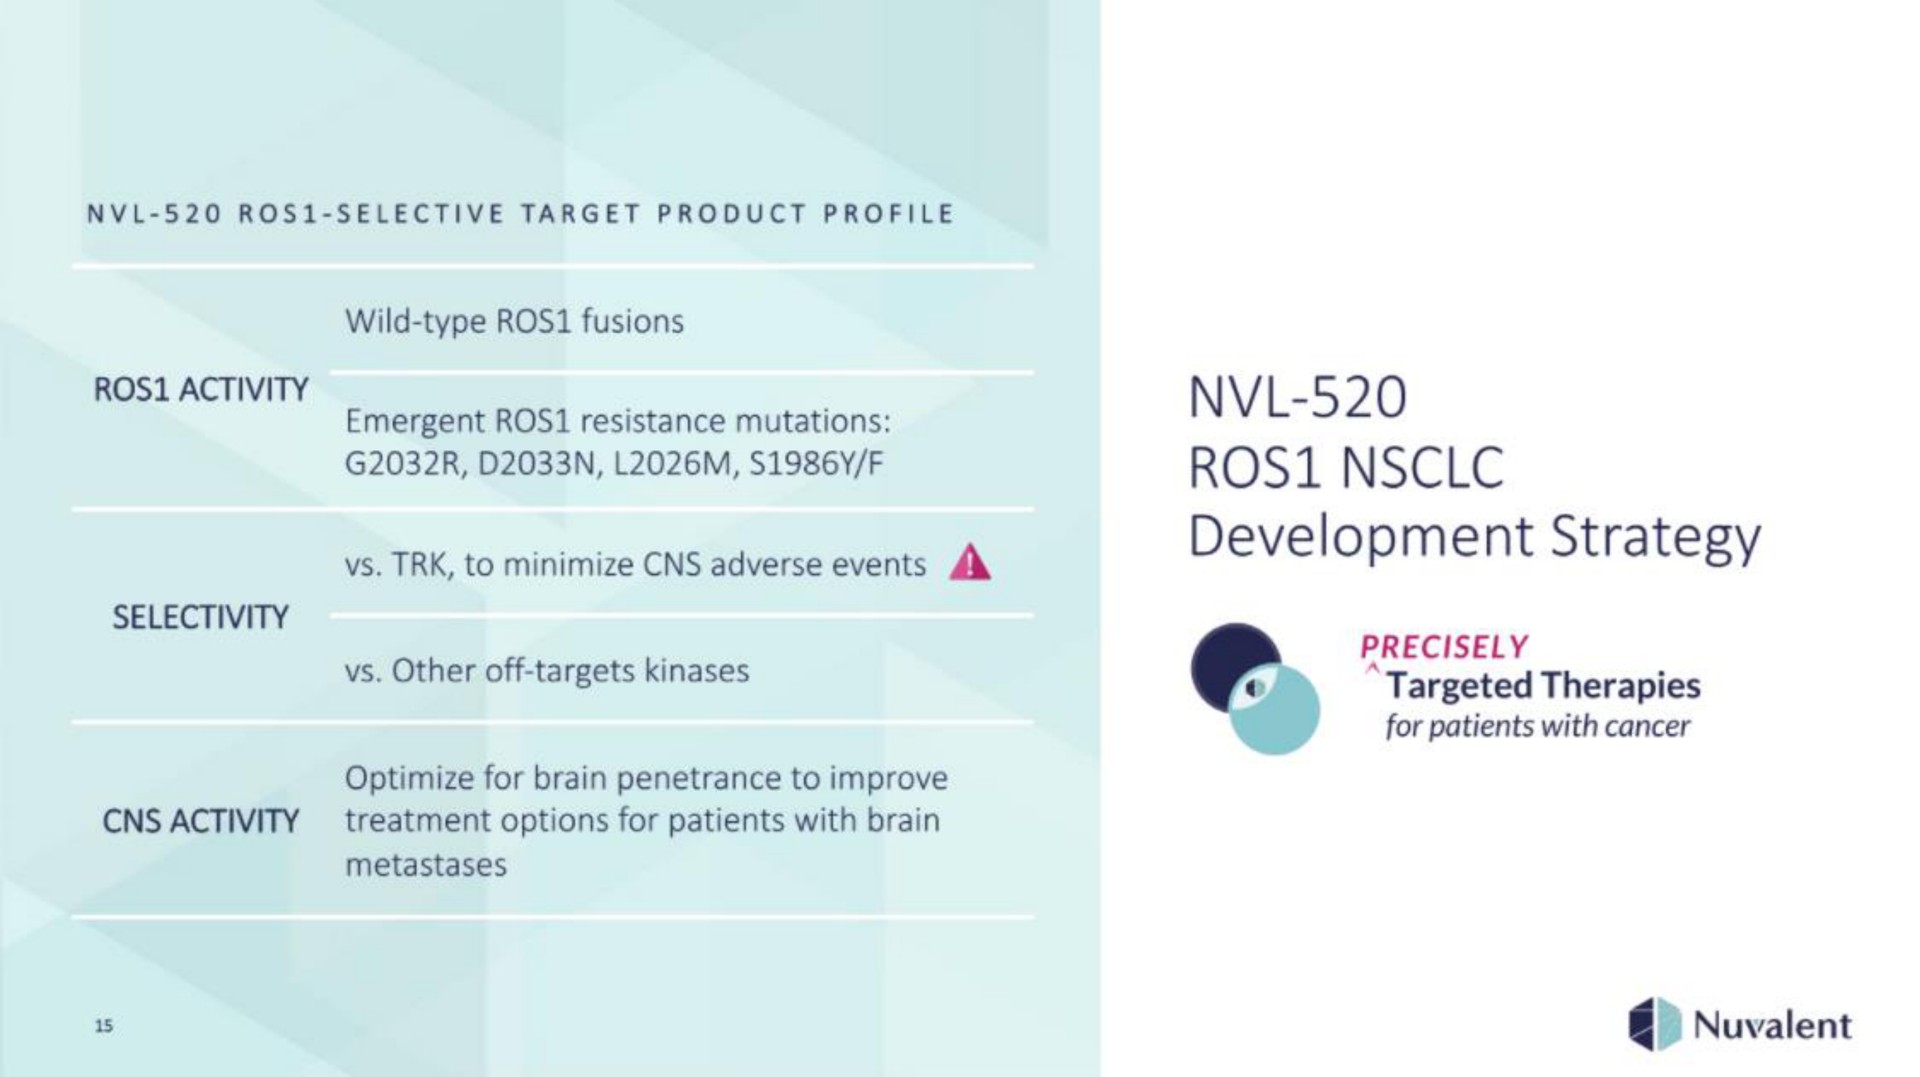 development strategy targeted therapies | Nuvalent